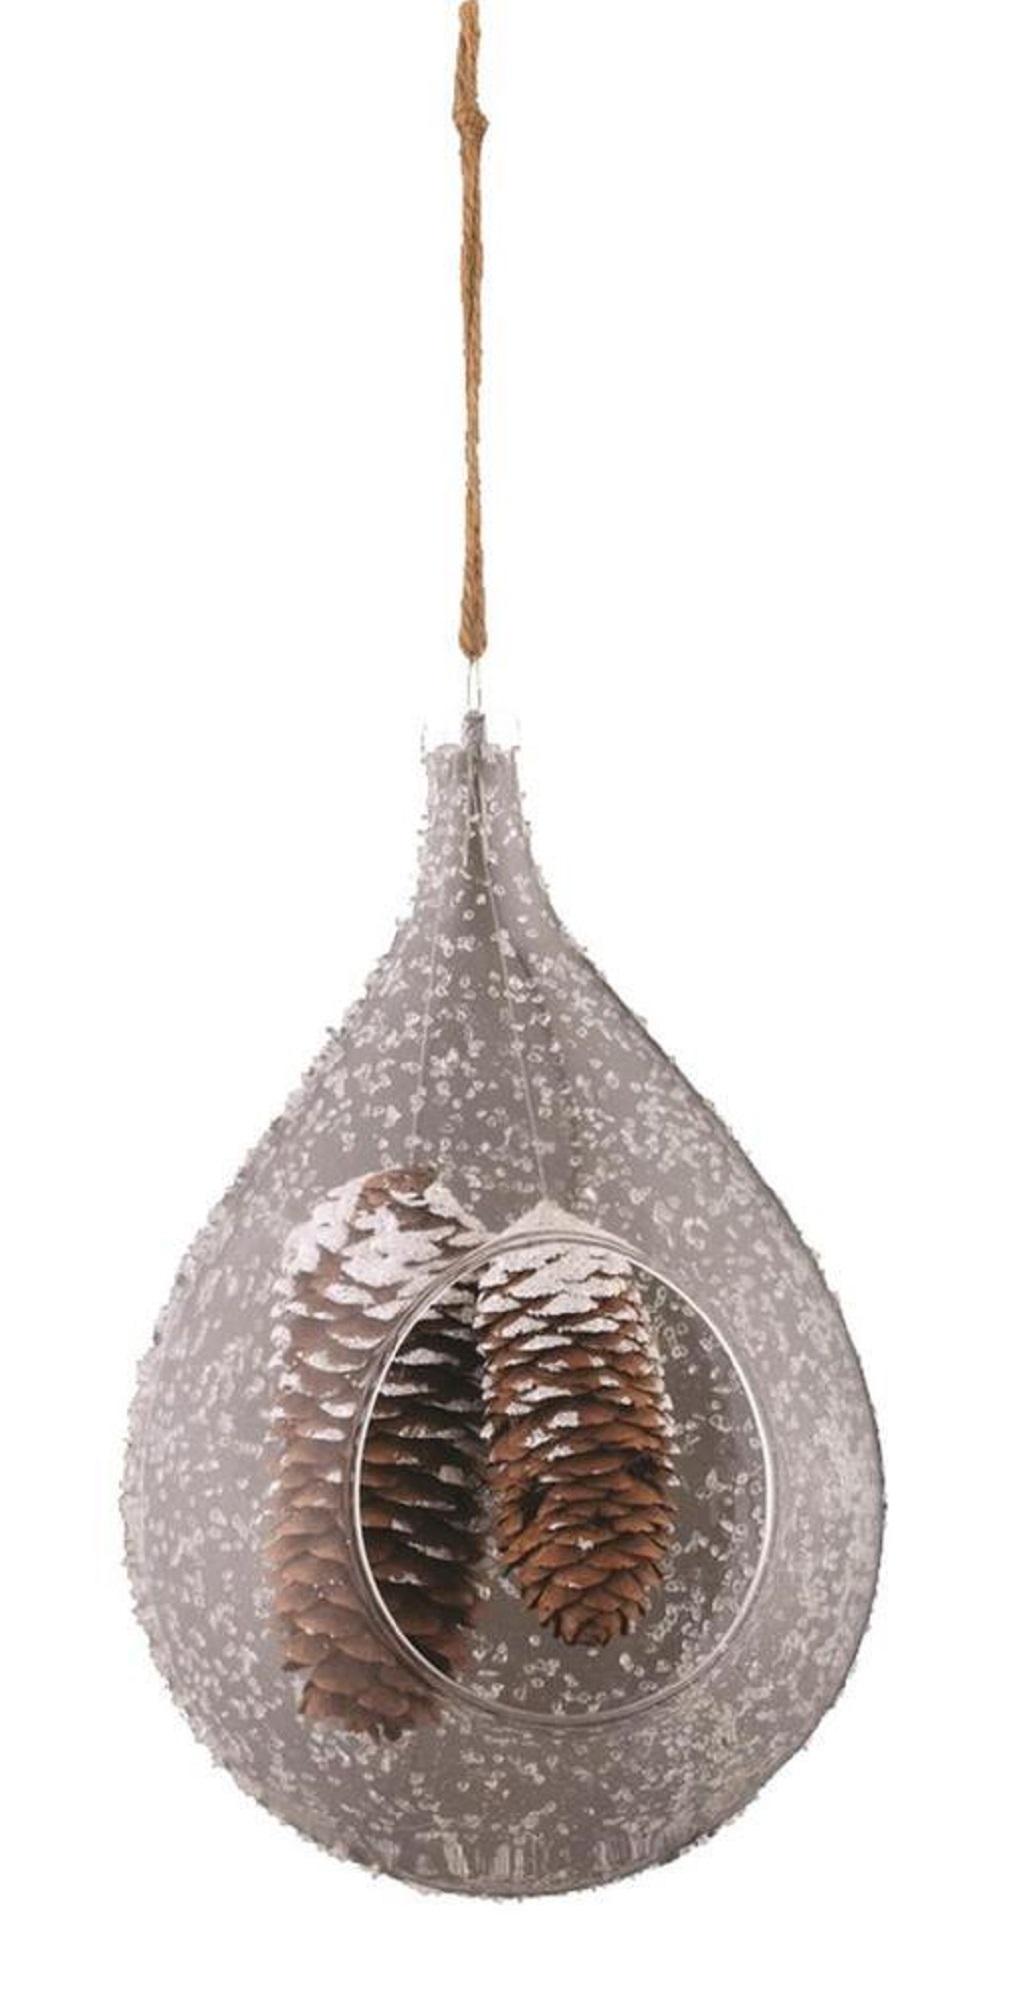 NAPA HOME & GARDEN 7.5" Dangling Pine Cones in Frosted Teardrop Christmas Ornament